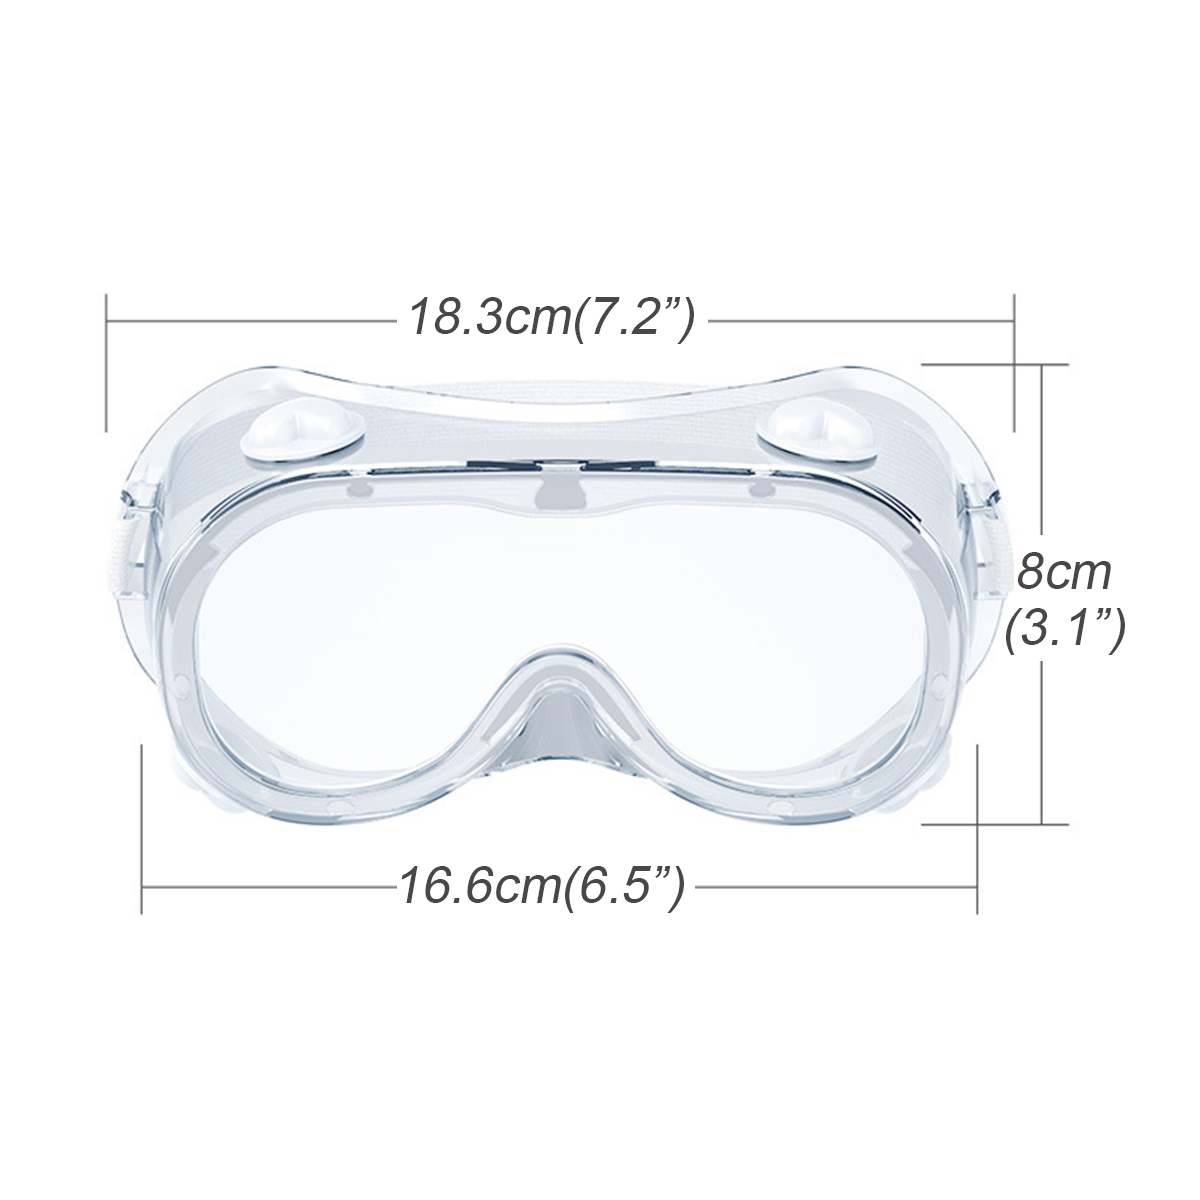 FDA-CE-Safety-Goggles-Anti-Fog-Dust-Protective-Goggles-Splash-proof-Glasses-Lens-Lab-Work-Eye-Protec-1649728-10